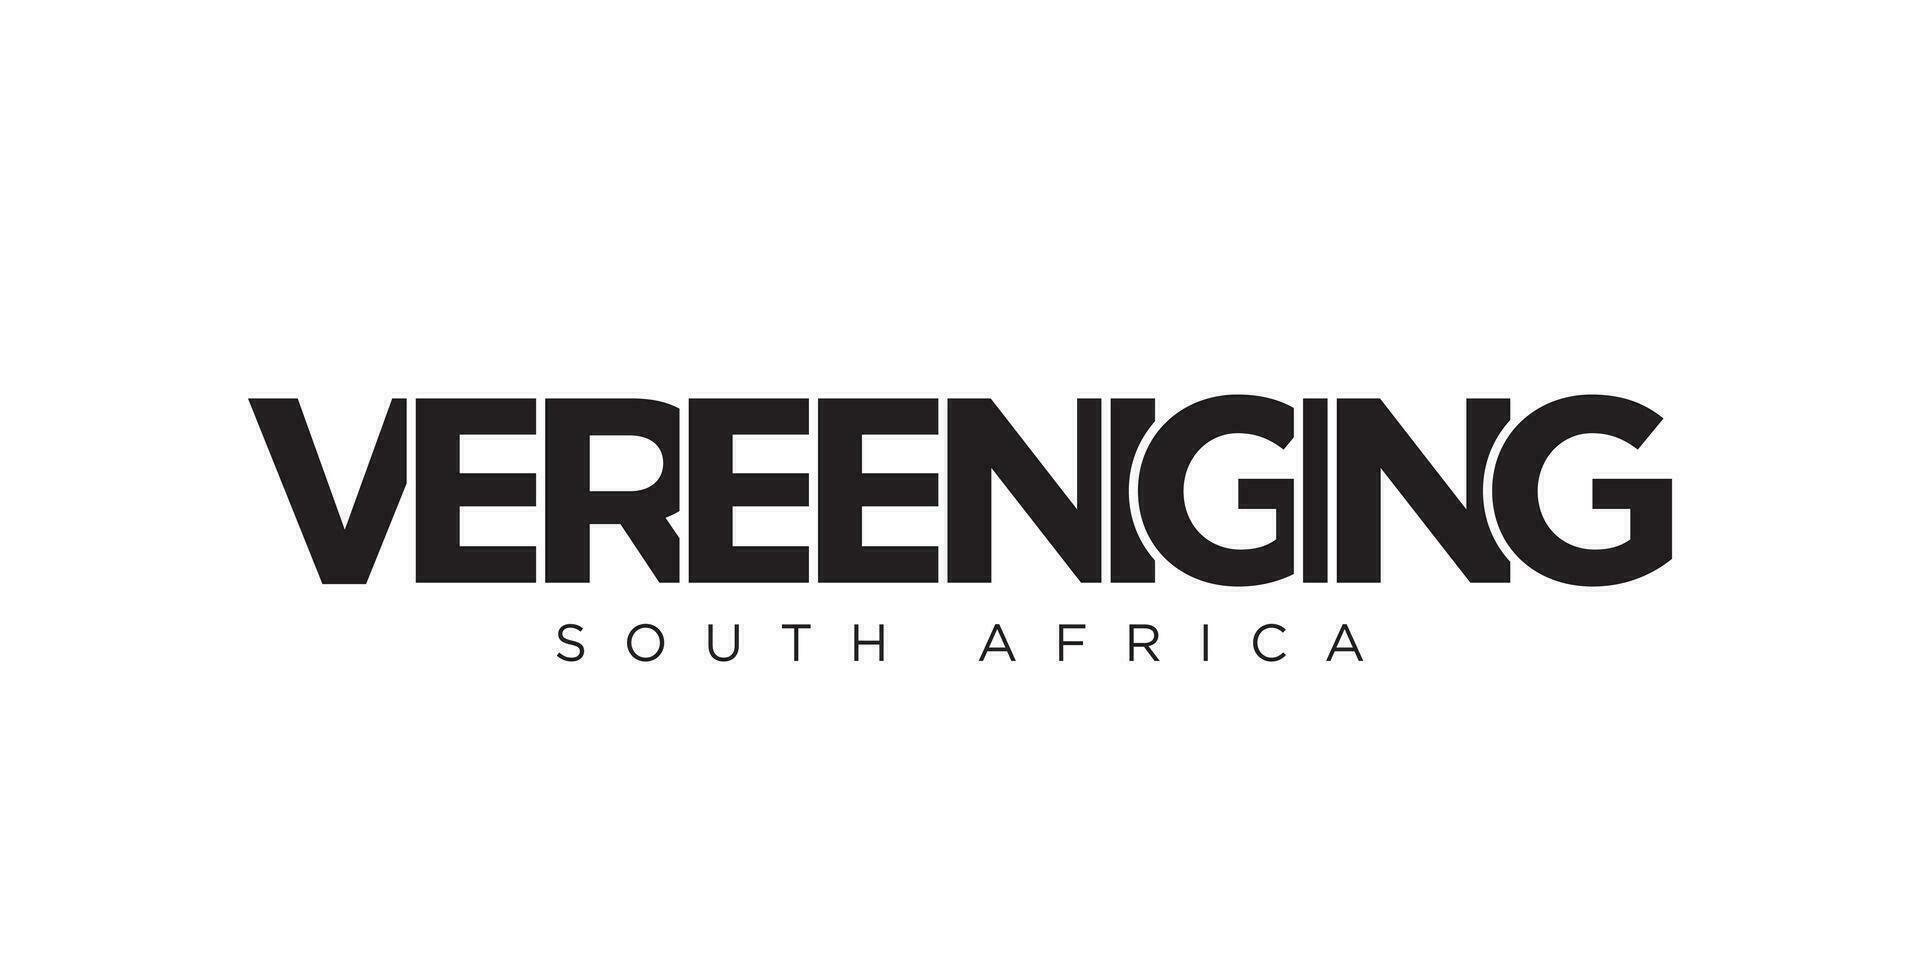 Vereeniging in the South Africa emblem. The design features a geometric style, vector illustration with bold typography in a modern font. The graphic slogan lettering.